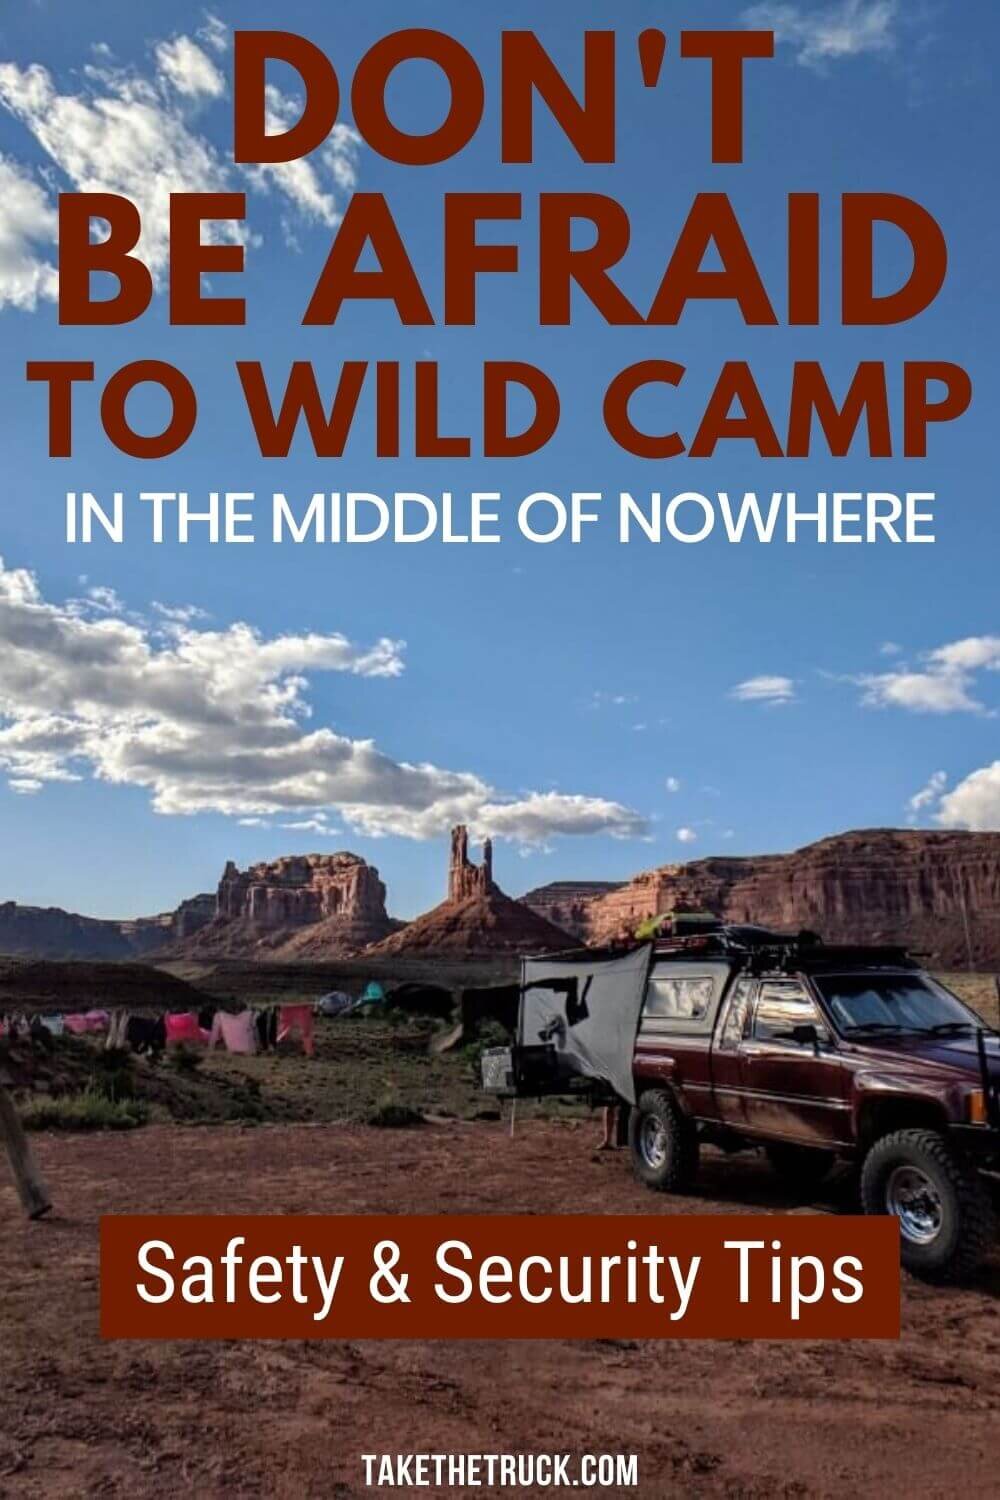 Is boondocking safe?! This post is all about wild camping safety and camp security while boondocking. Lots of camping safety tips and ideas on feeling secure while camping off grid are given.